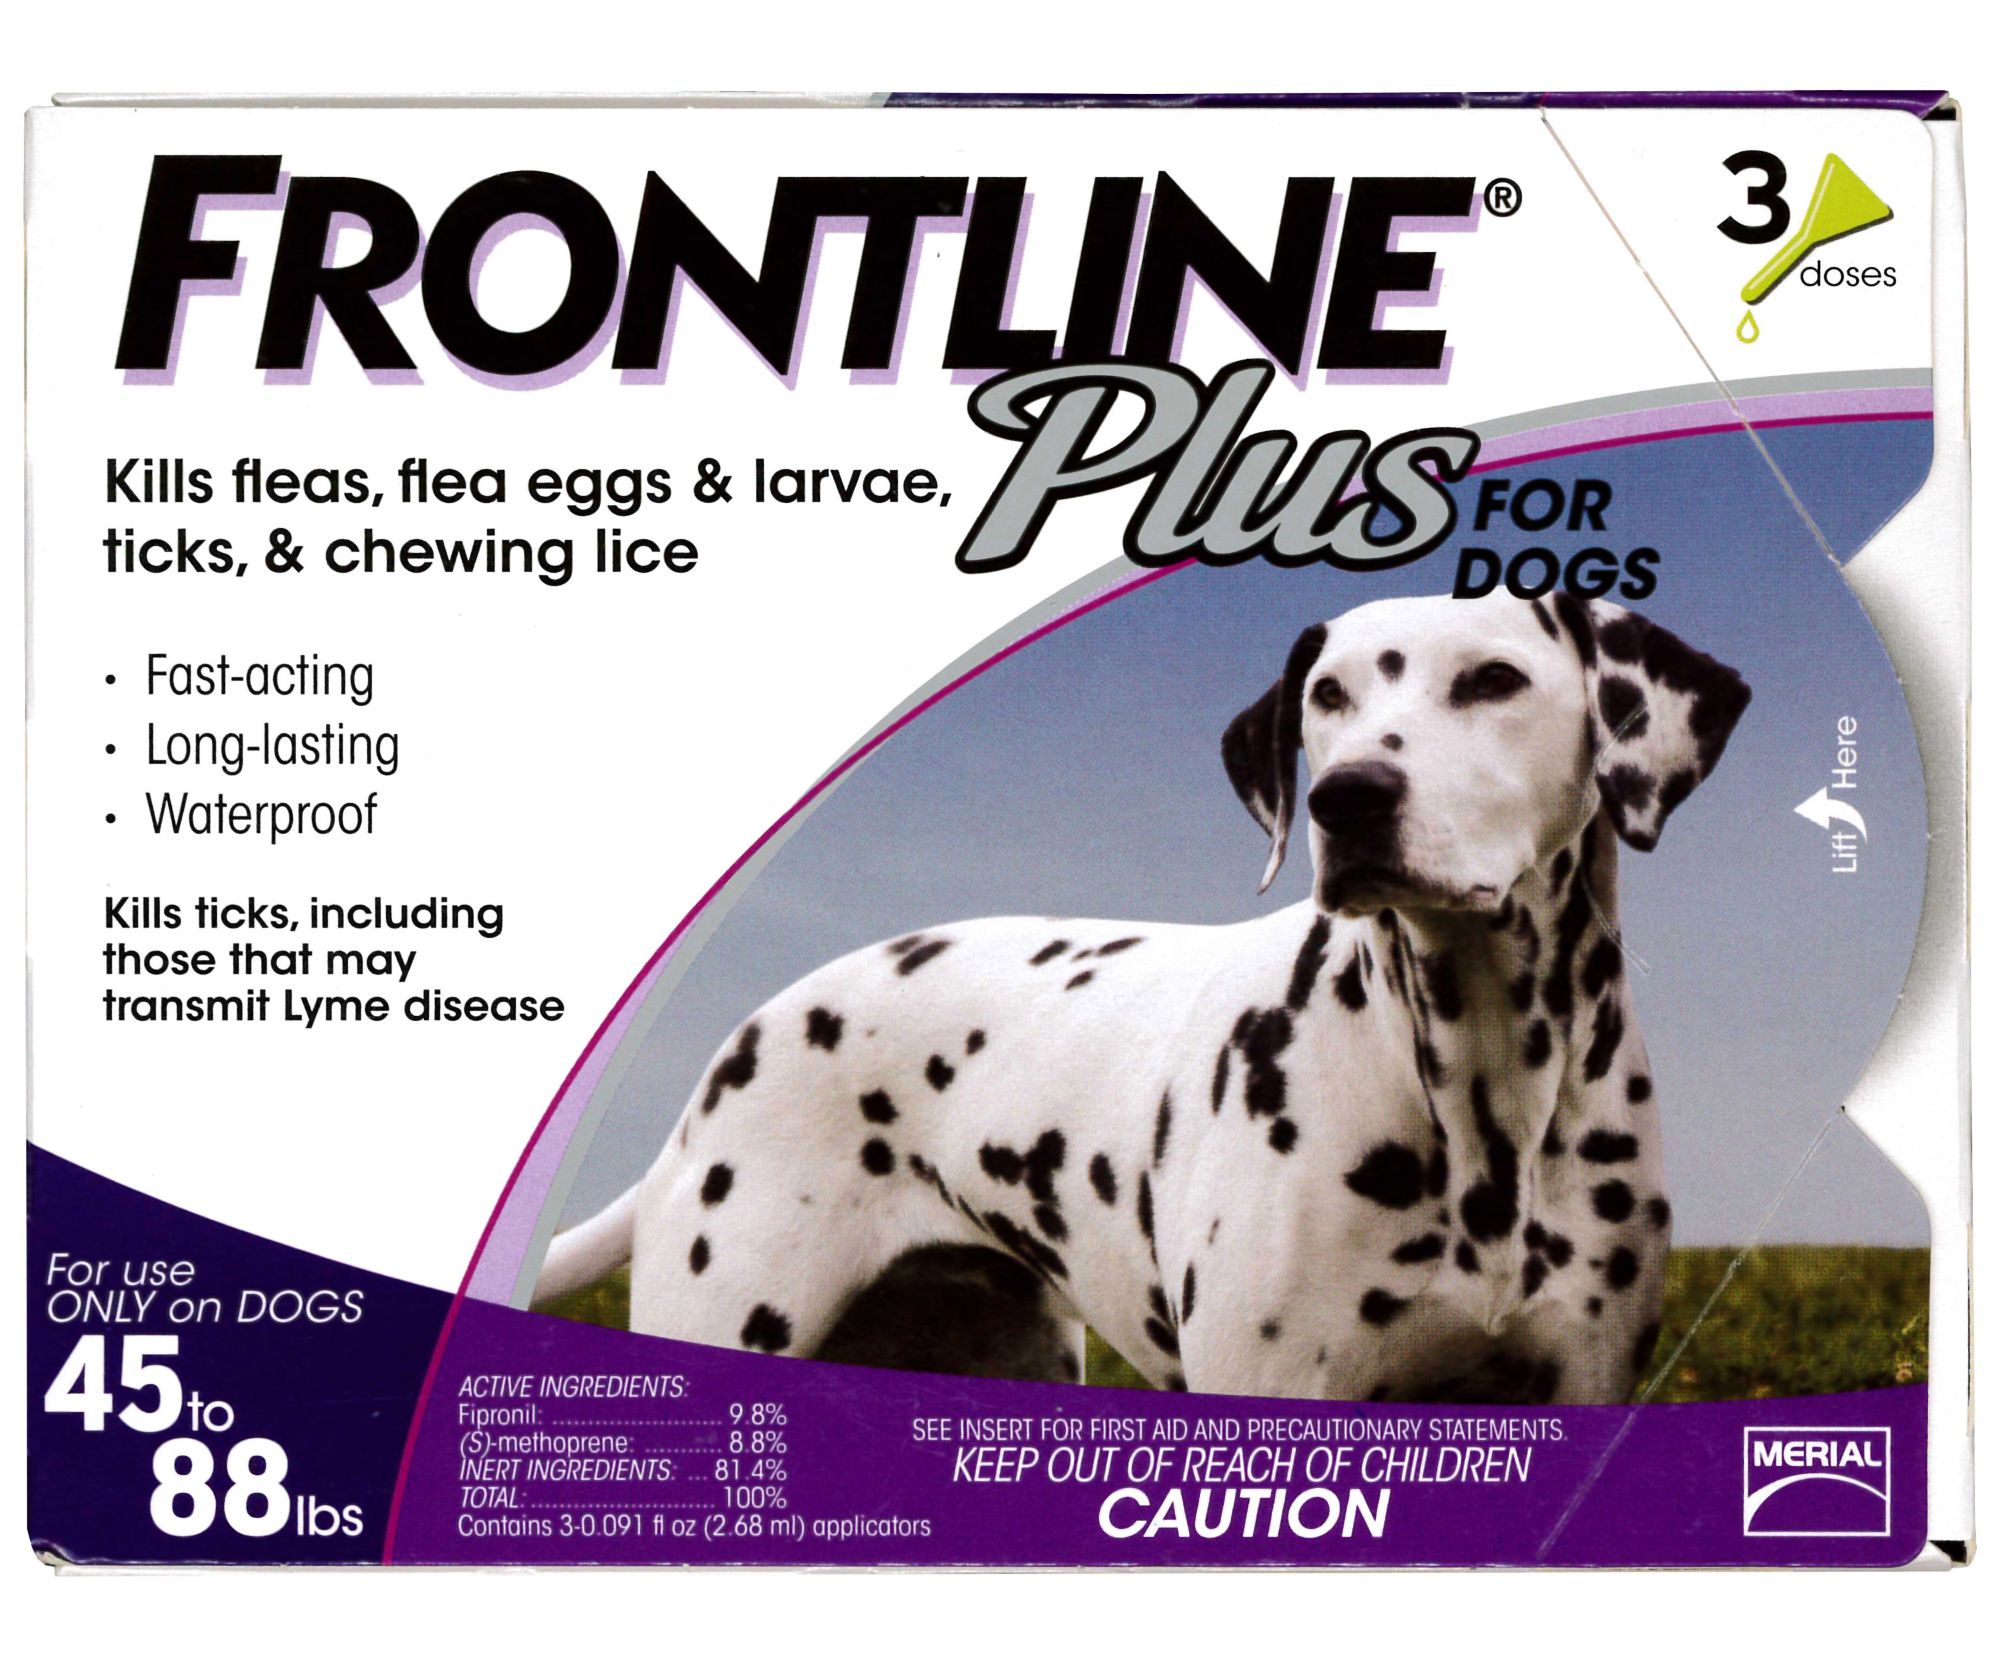 Frontline Plus For Large Dogs, 3 